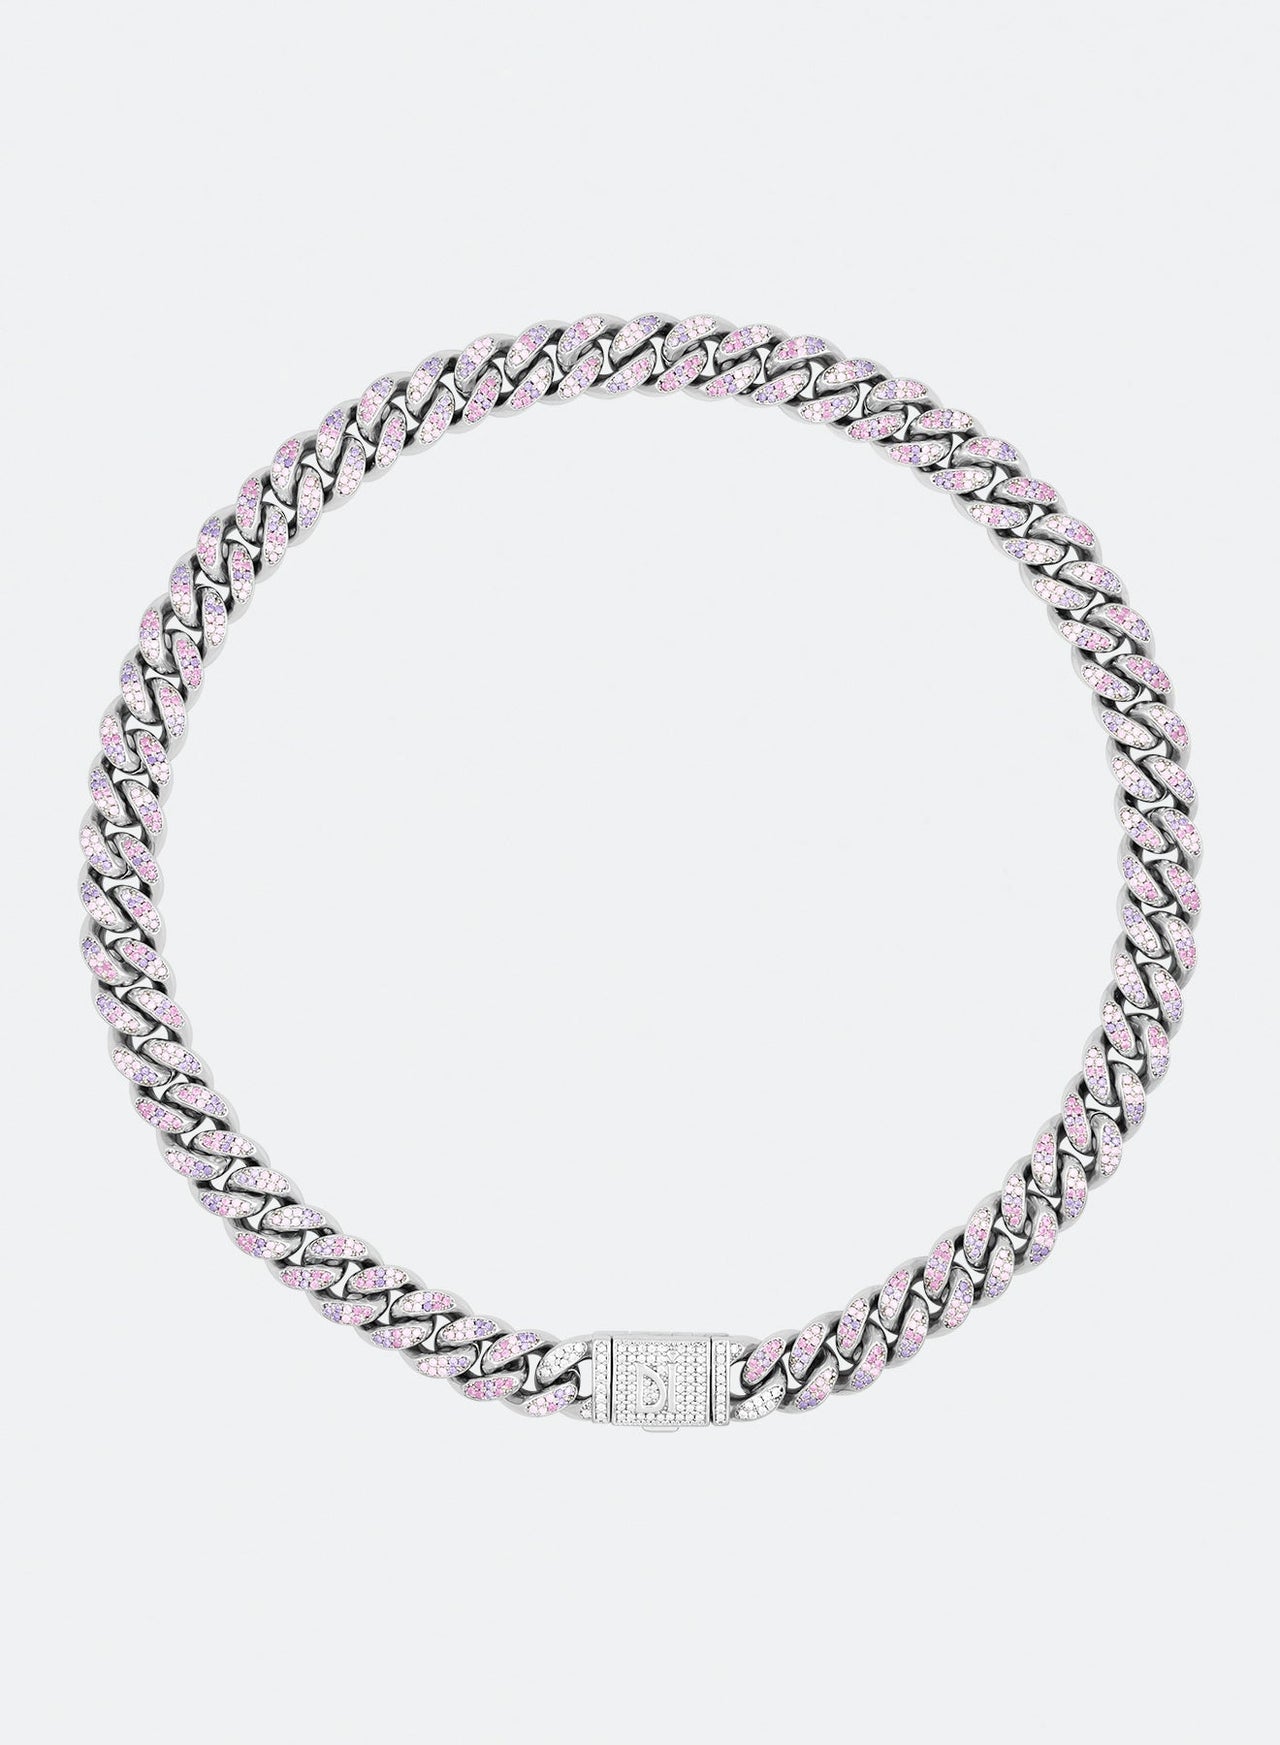 18k white gold coated cuban chain necklace with hand-set micropavé stones in white, purple, morganite and pink